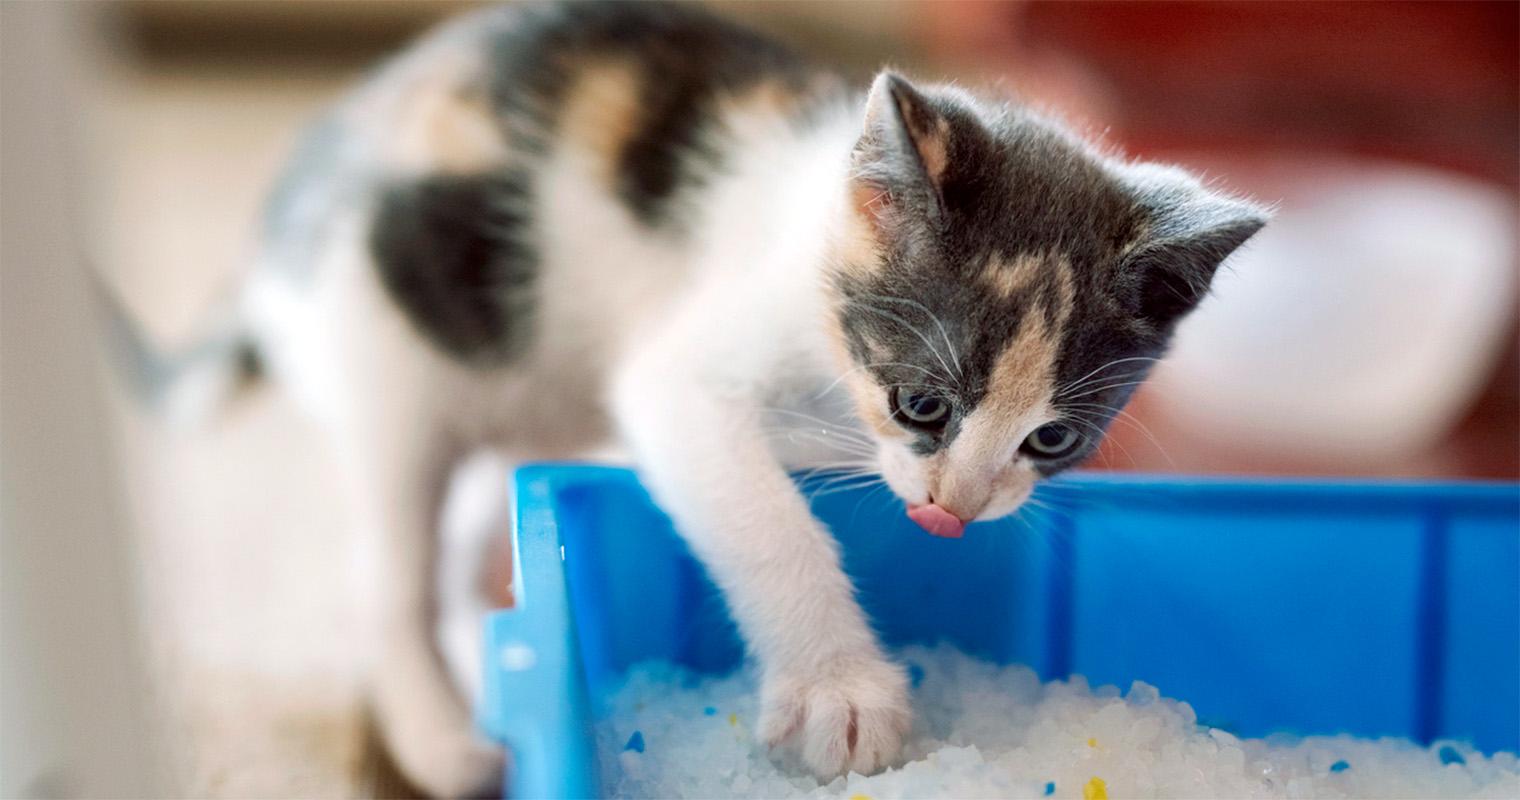 Why Won’t My Cat Use the Litter Box? Solving Litter Box Problems